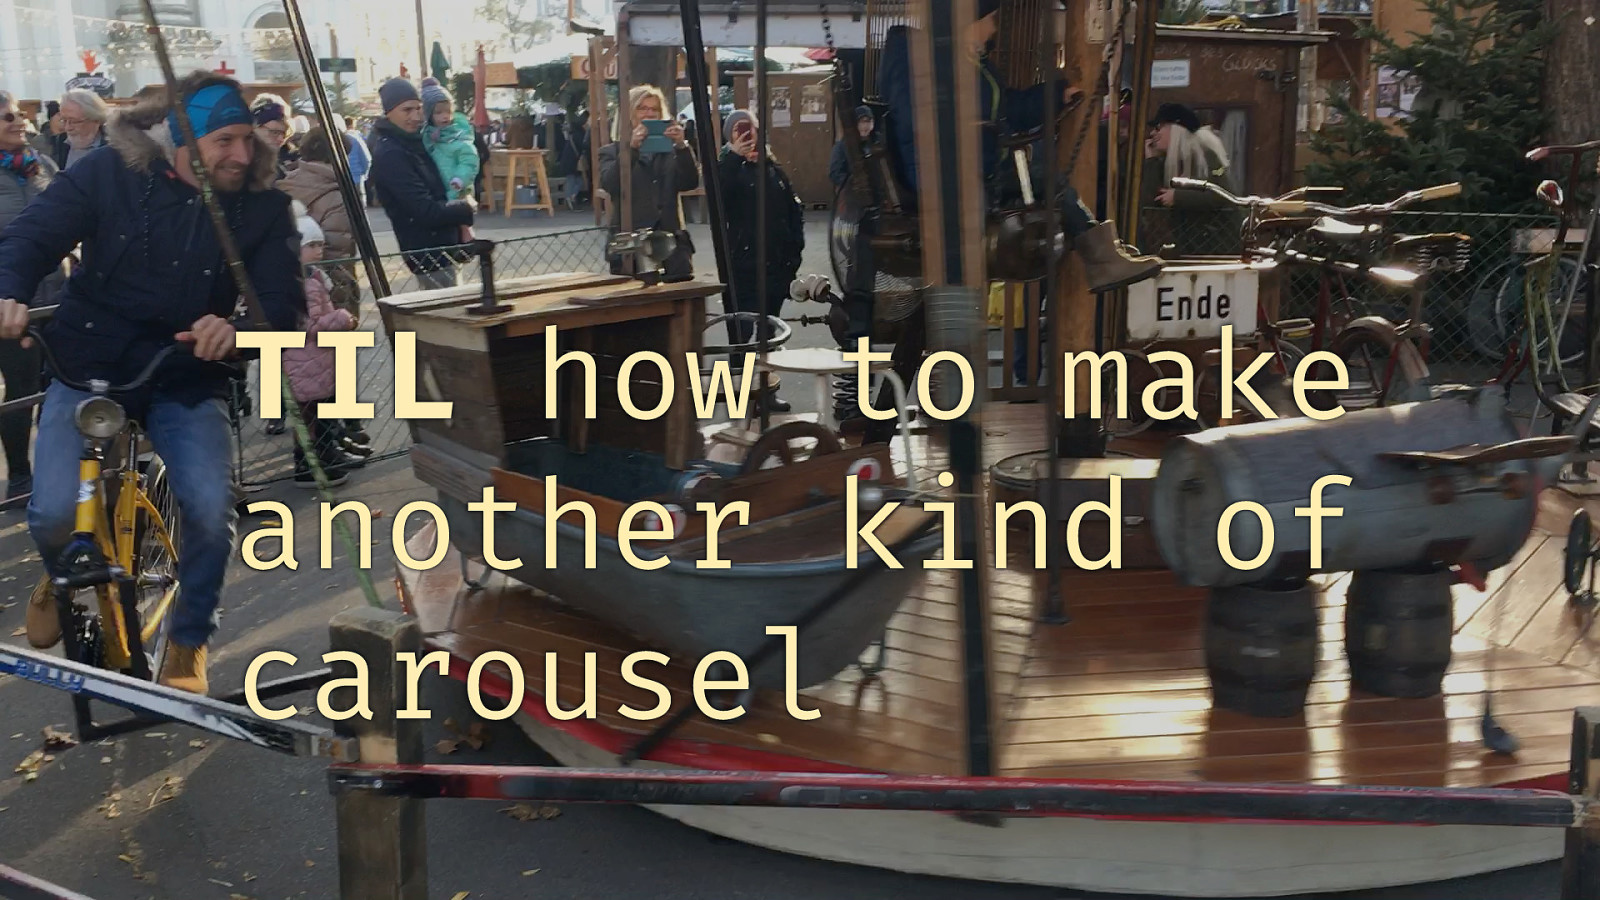 TIL how to make another kind of carousel by Gunnar Bittersmann